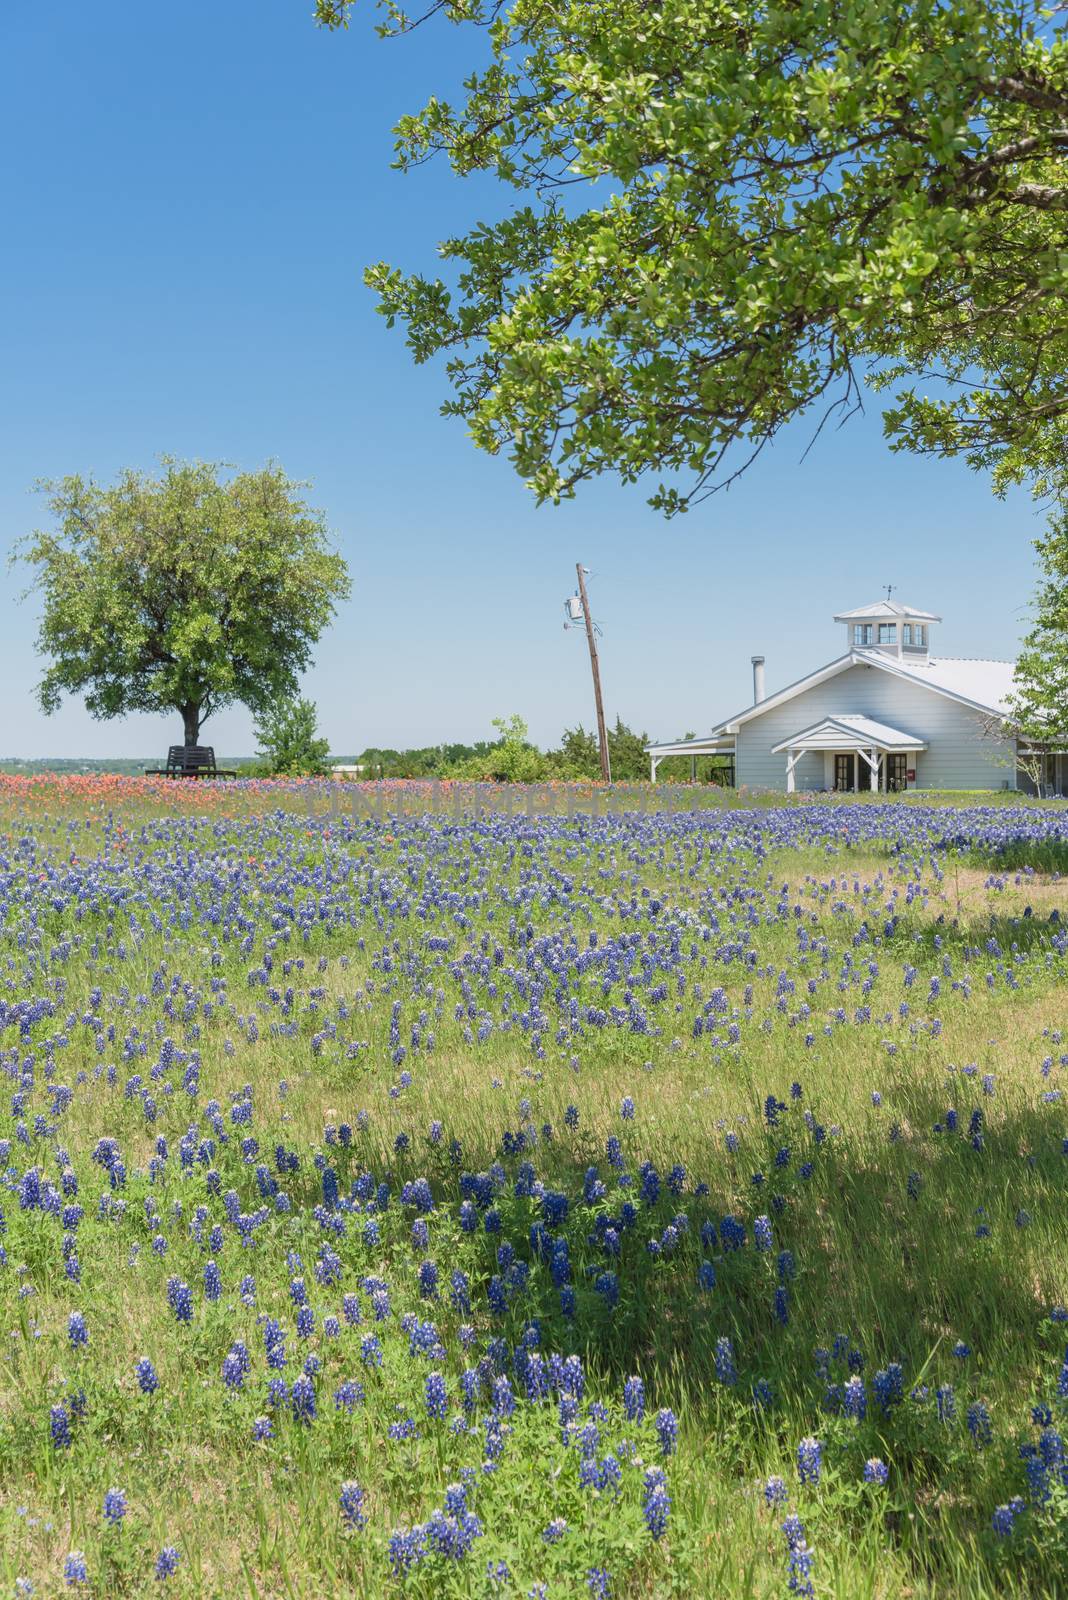 Colorful Bluebonnet blossom at farm in North Texas, America by trongnguyen